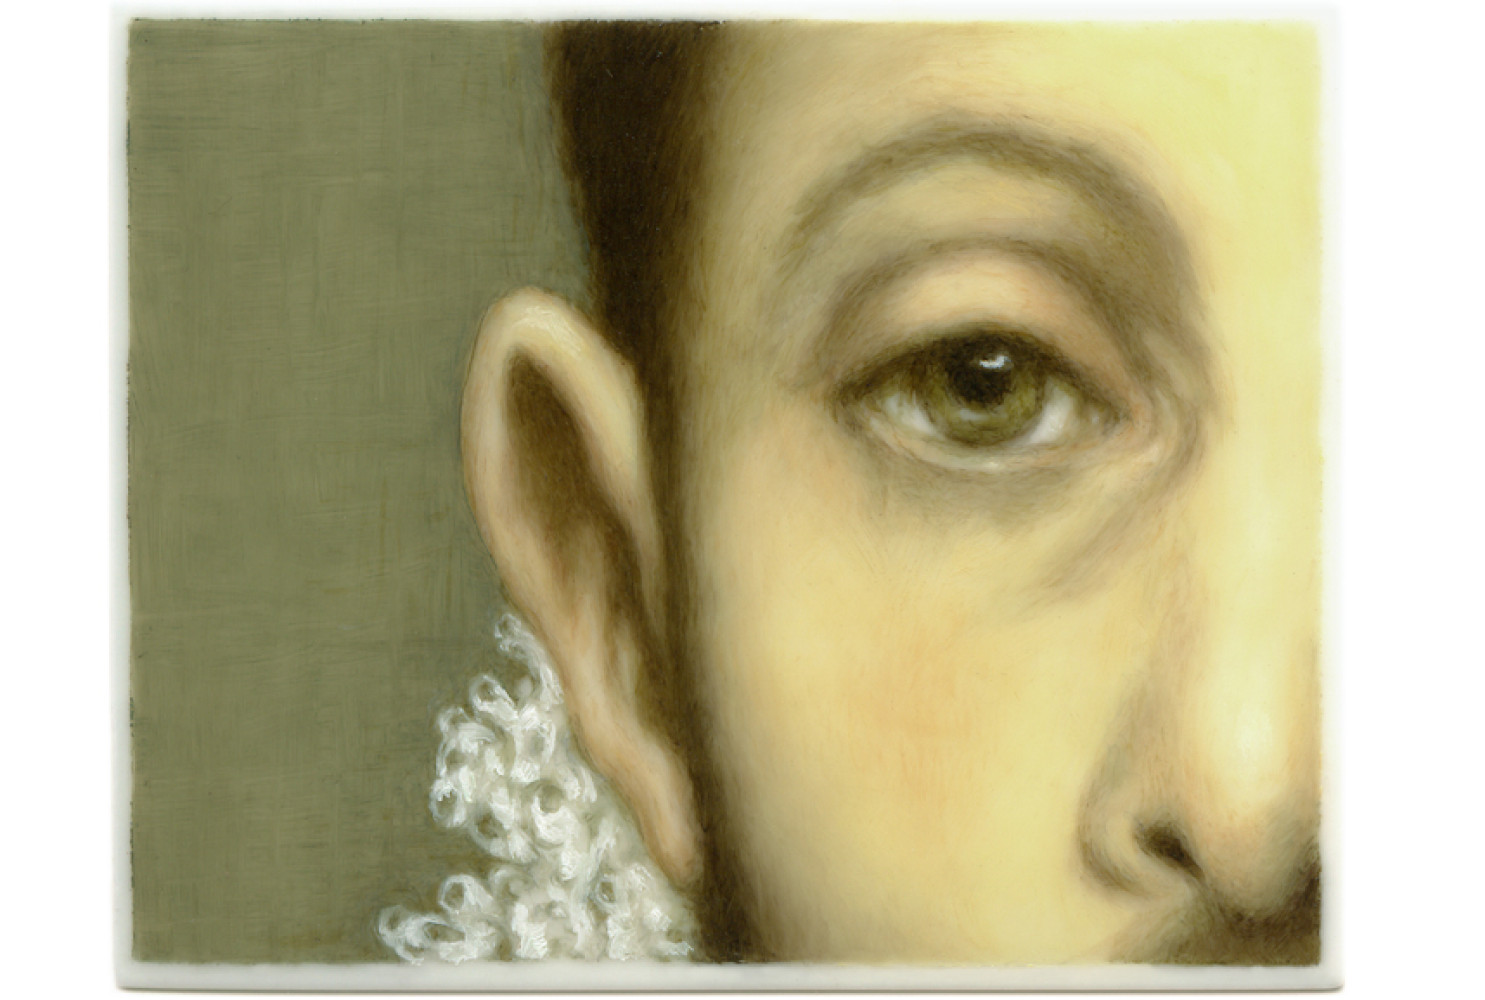 Caballero (after El Greco) from Series II: Gaze of Desire, 2013, By Tabitha Vevers (American, b. 1957); Oil on Ivorine; 2 3/4 x 3 1/2 inches on 9 x 12 inches panel; Collection of the artist, Courtesy of Bookstein Projects
